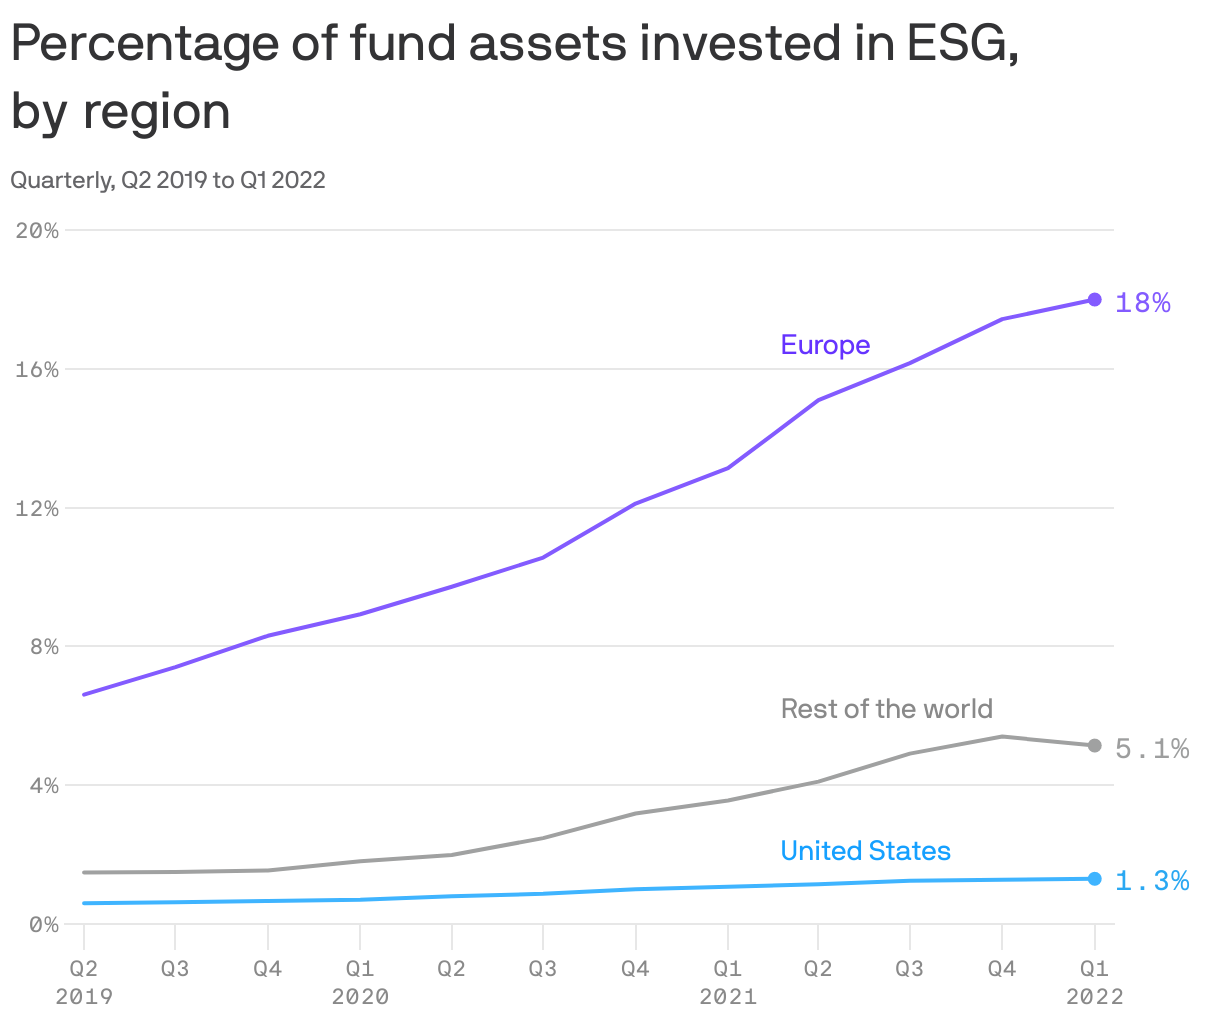 Percentage of fund assets invested in ESG, by&nbspregion